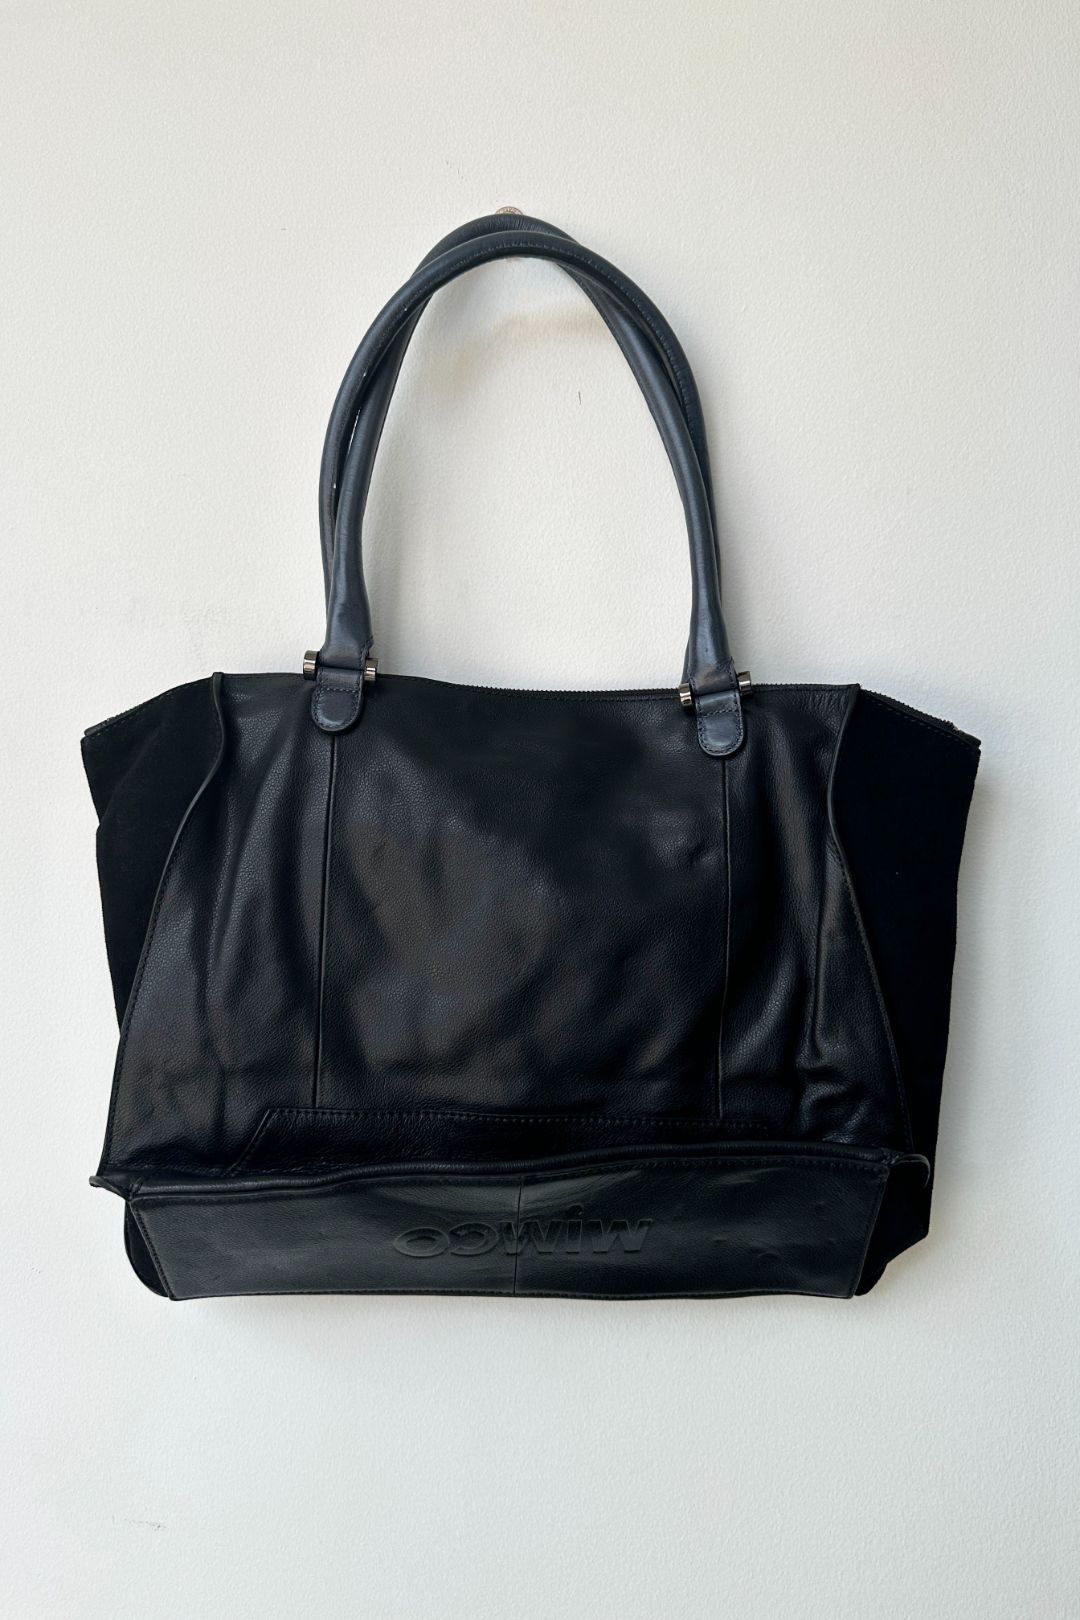 Mimco Black Leather Bowler Style Bag